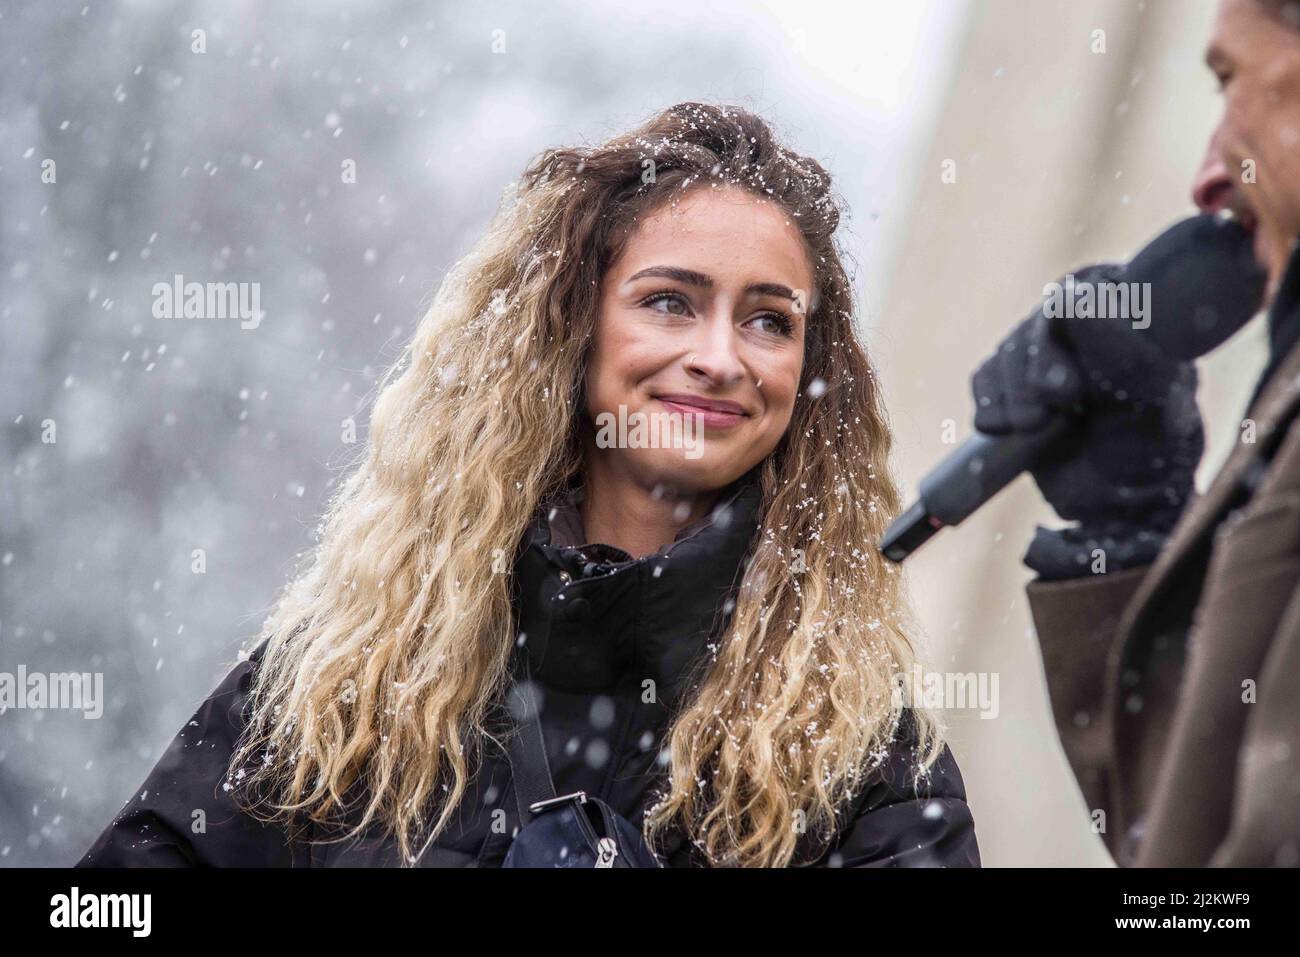 Munich, Bavaria, Germany. 2nd Apr, 2022. SAMIRA YOUHA, a former pathology prepraration assistant at the LMU Pathology Institute who was fired for producing a video from within the facility. Youha appears to already have been on track prior to the firing to launch a conspiratorial-resistance initiative against the state which has also floundered. Despite sweeping relaxations in the anti-Corona regulations, including elimination of most rules and still no vaccination requirement, the Corona rebels of Munich, Germany organized a large protest primarily against vaccines and vaccine mandates that Stock Photo